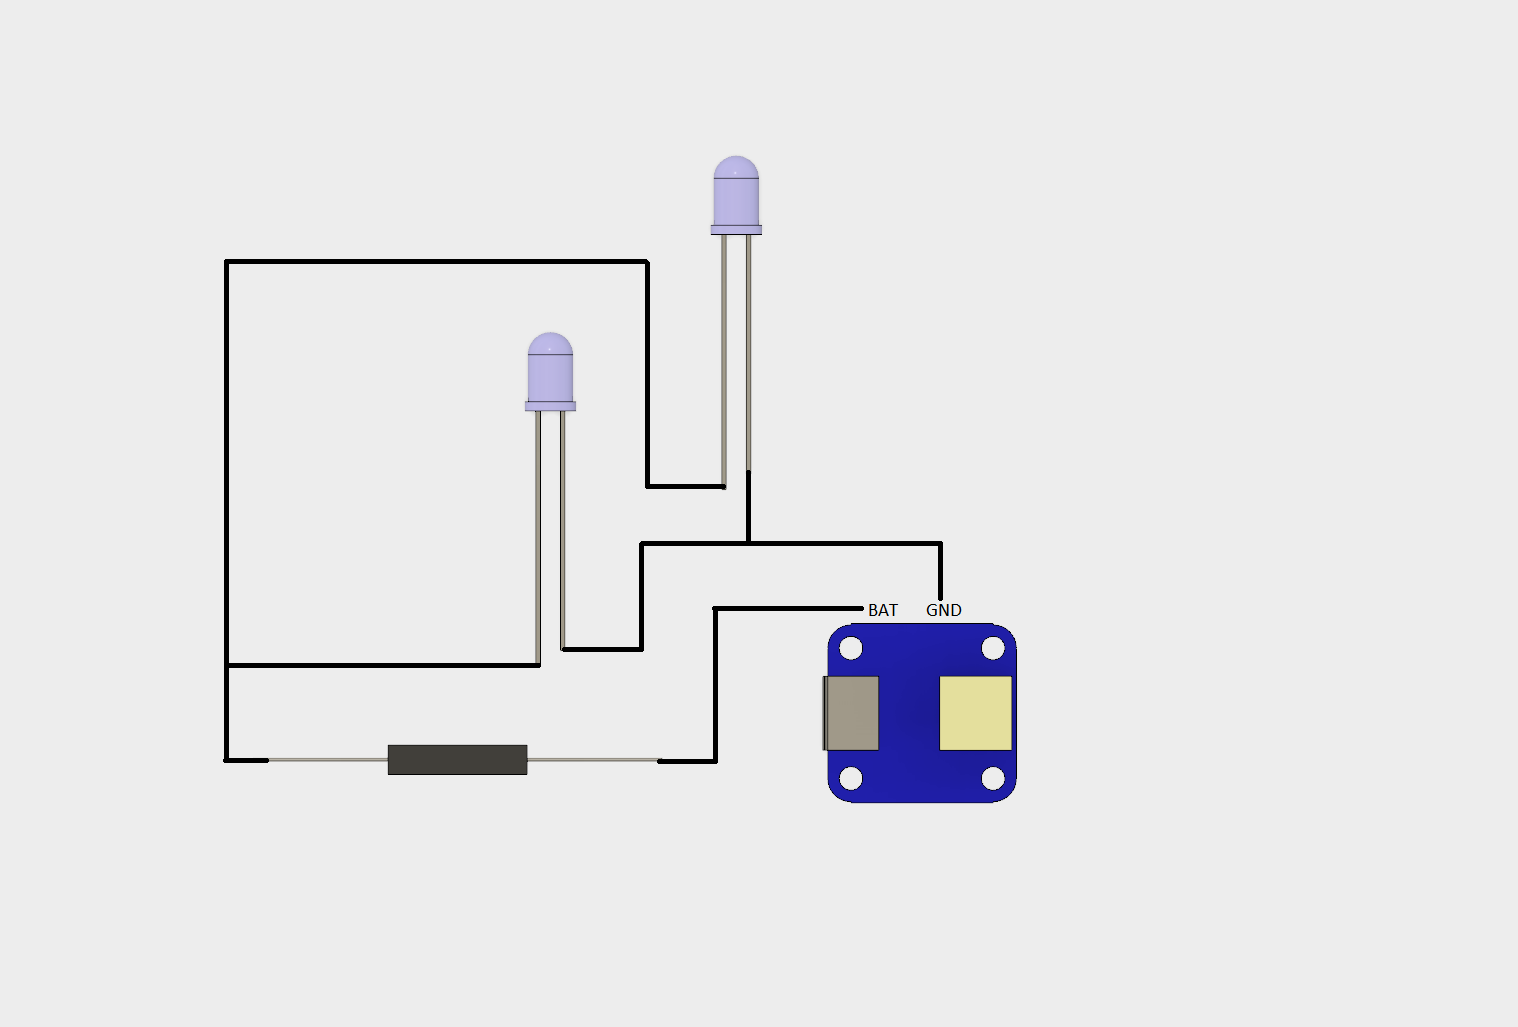 Pretty basic circuit. My drawing is kinda crap though. I'm working on figuring out the best way to show these things.